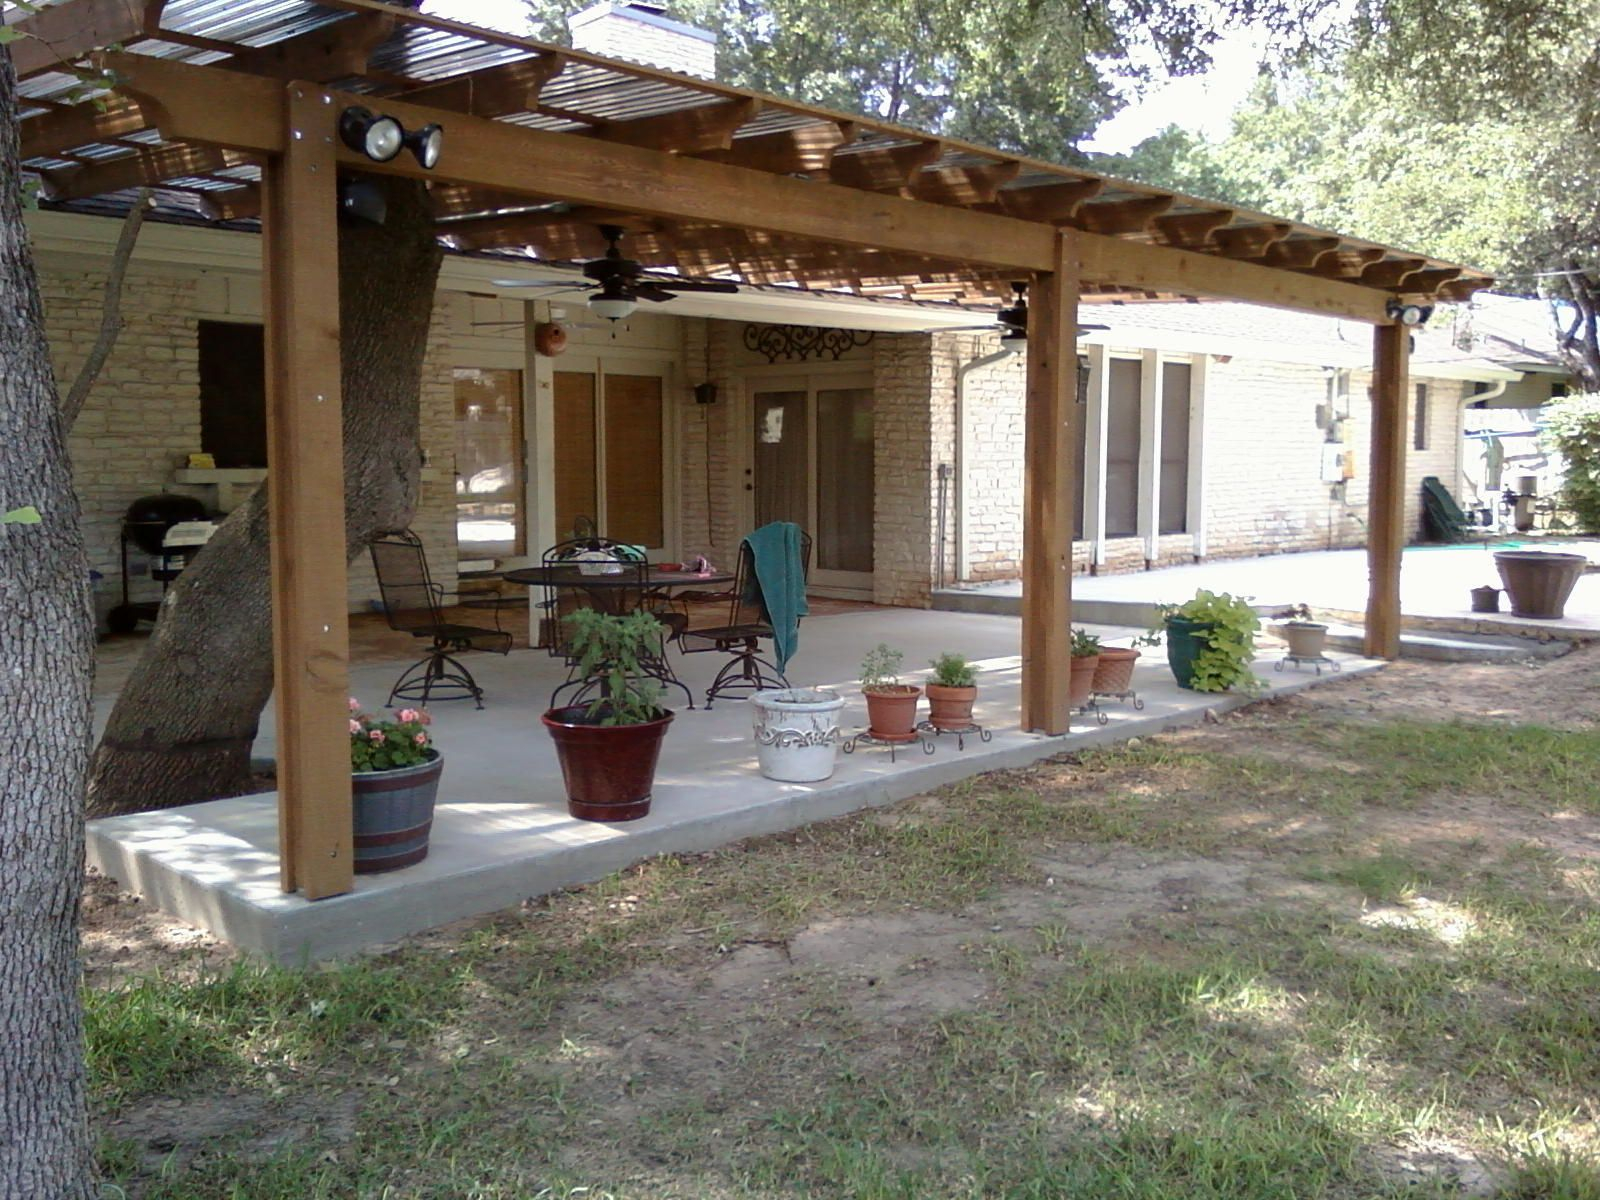 Ft Worth Patio Covers Project To Try Patio Cover intended for sizing 1600 X 1200